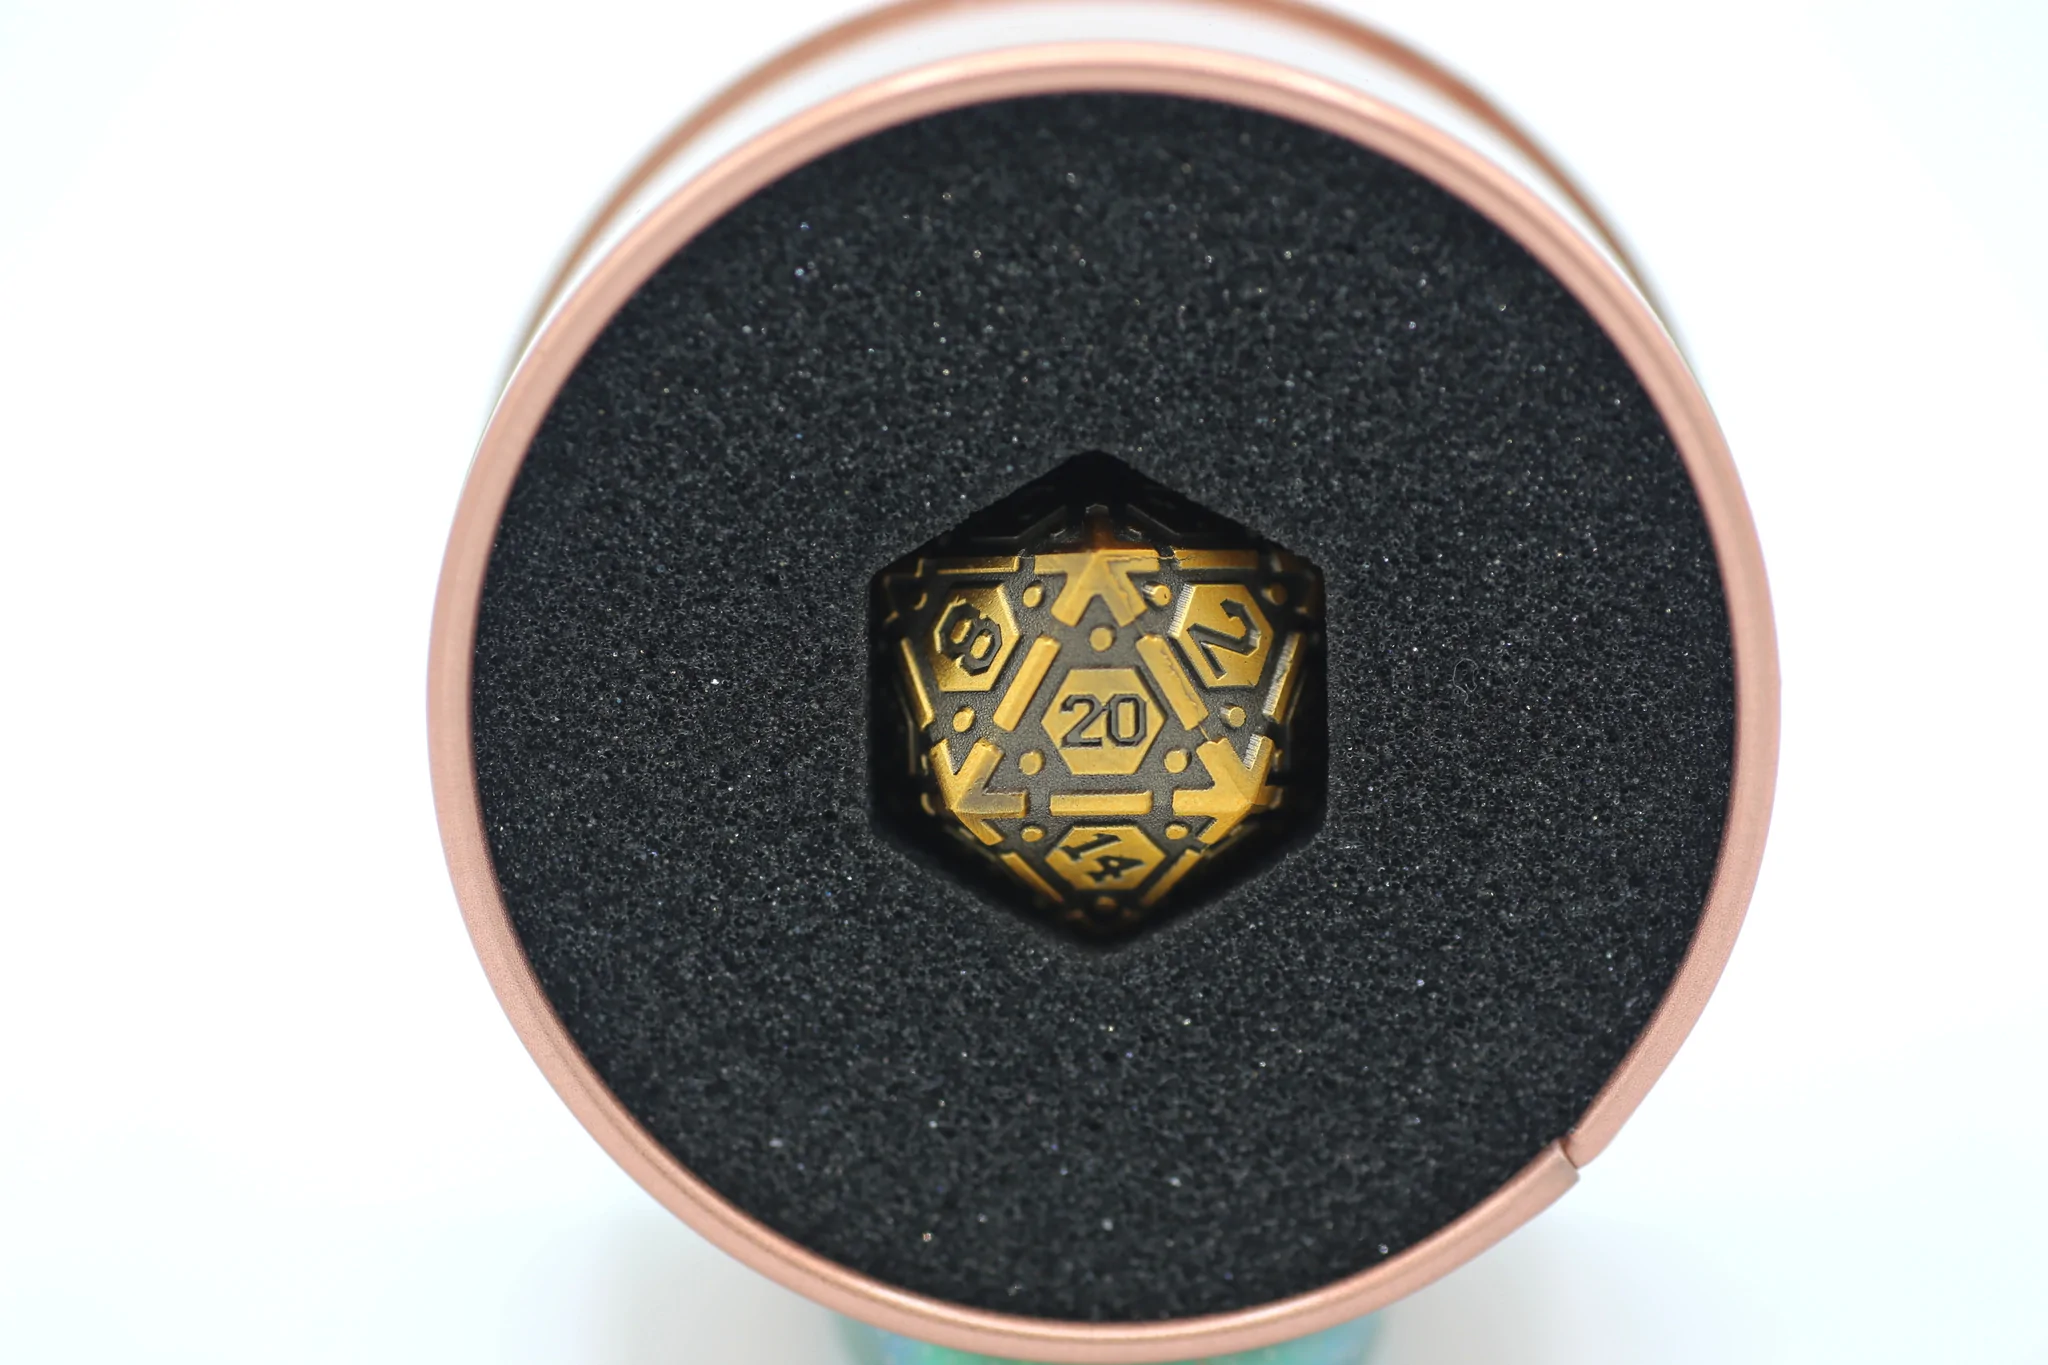 Single Solid Metal Star Map d20 Dice - Ancient Gold